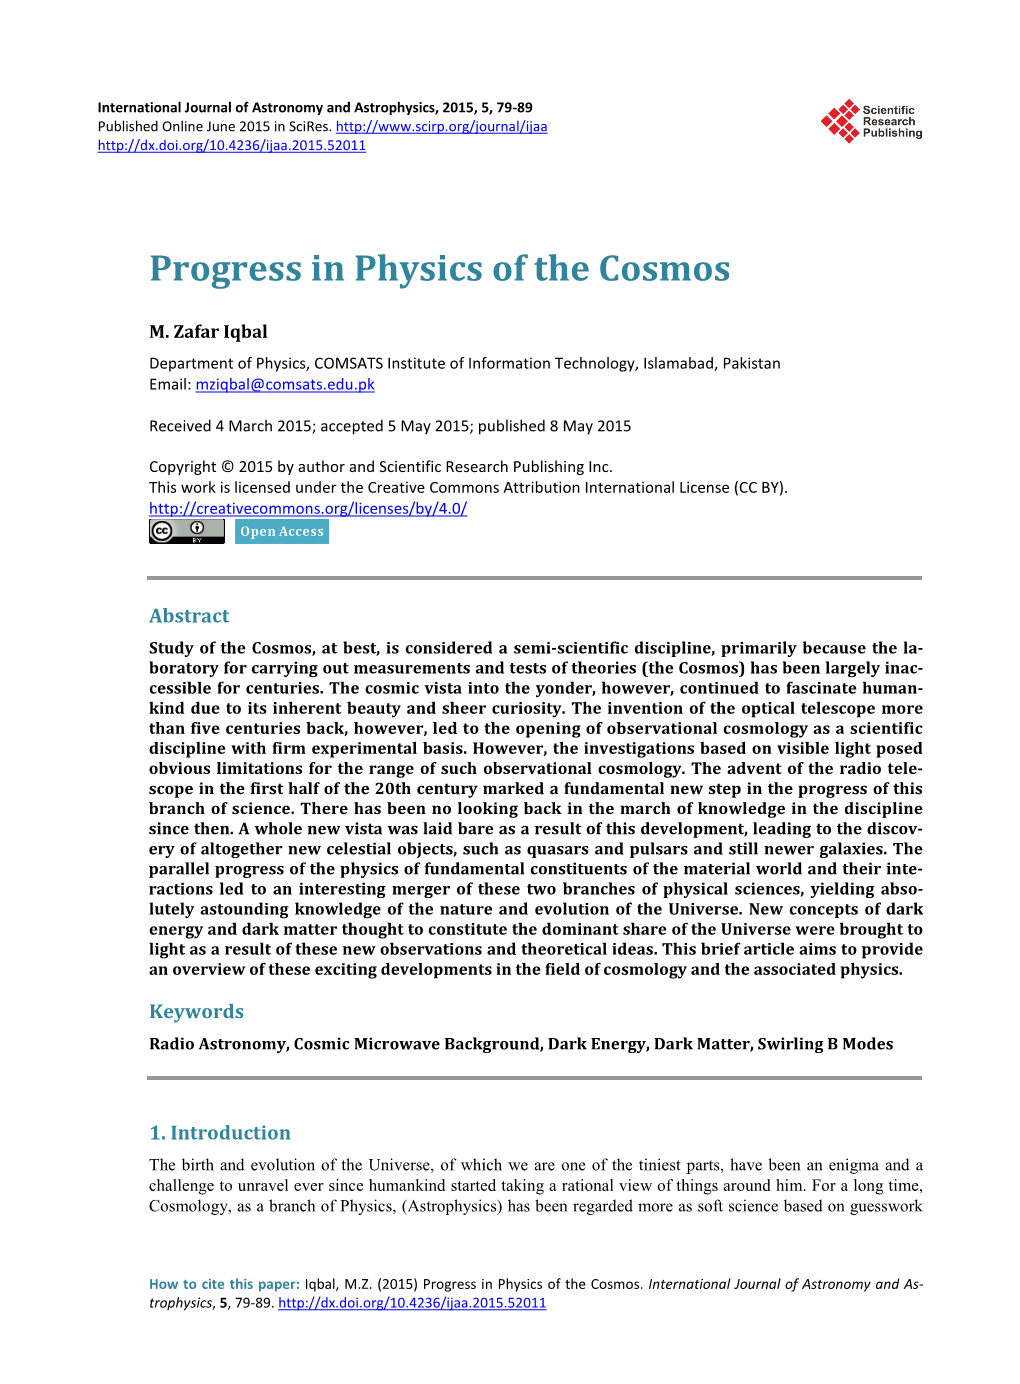 Progress in Physics of the Cosmos